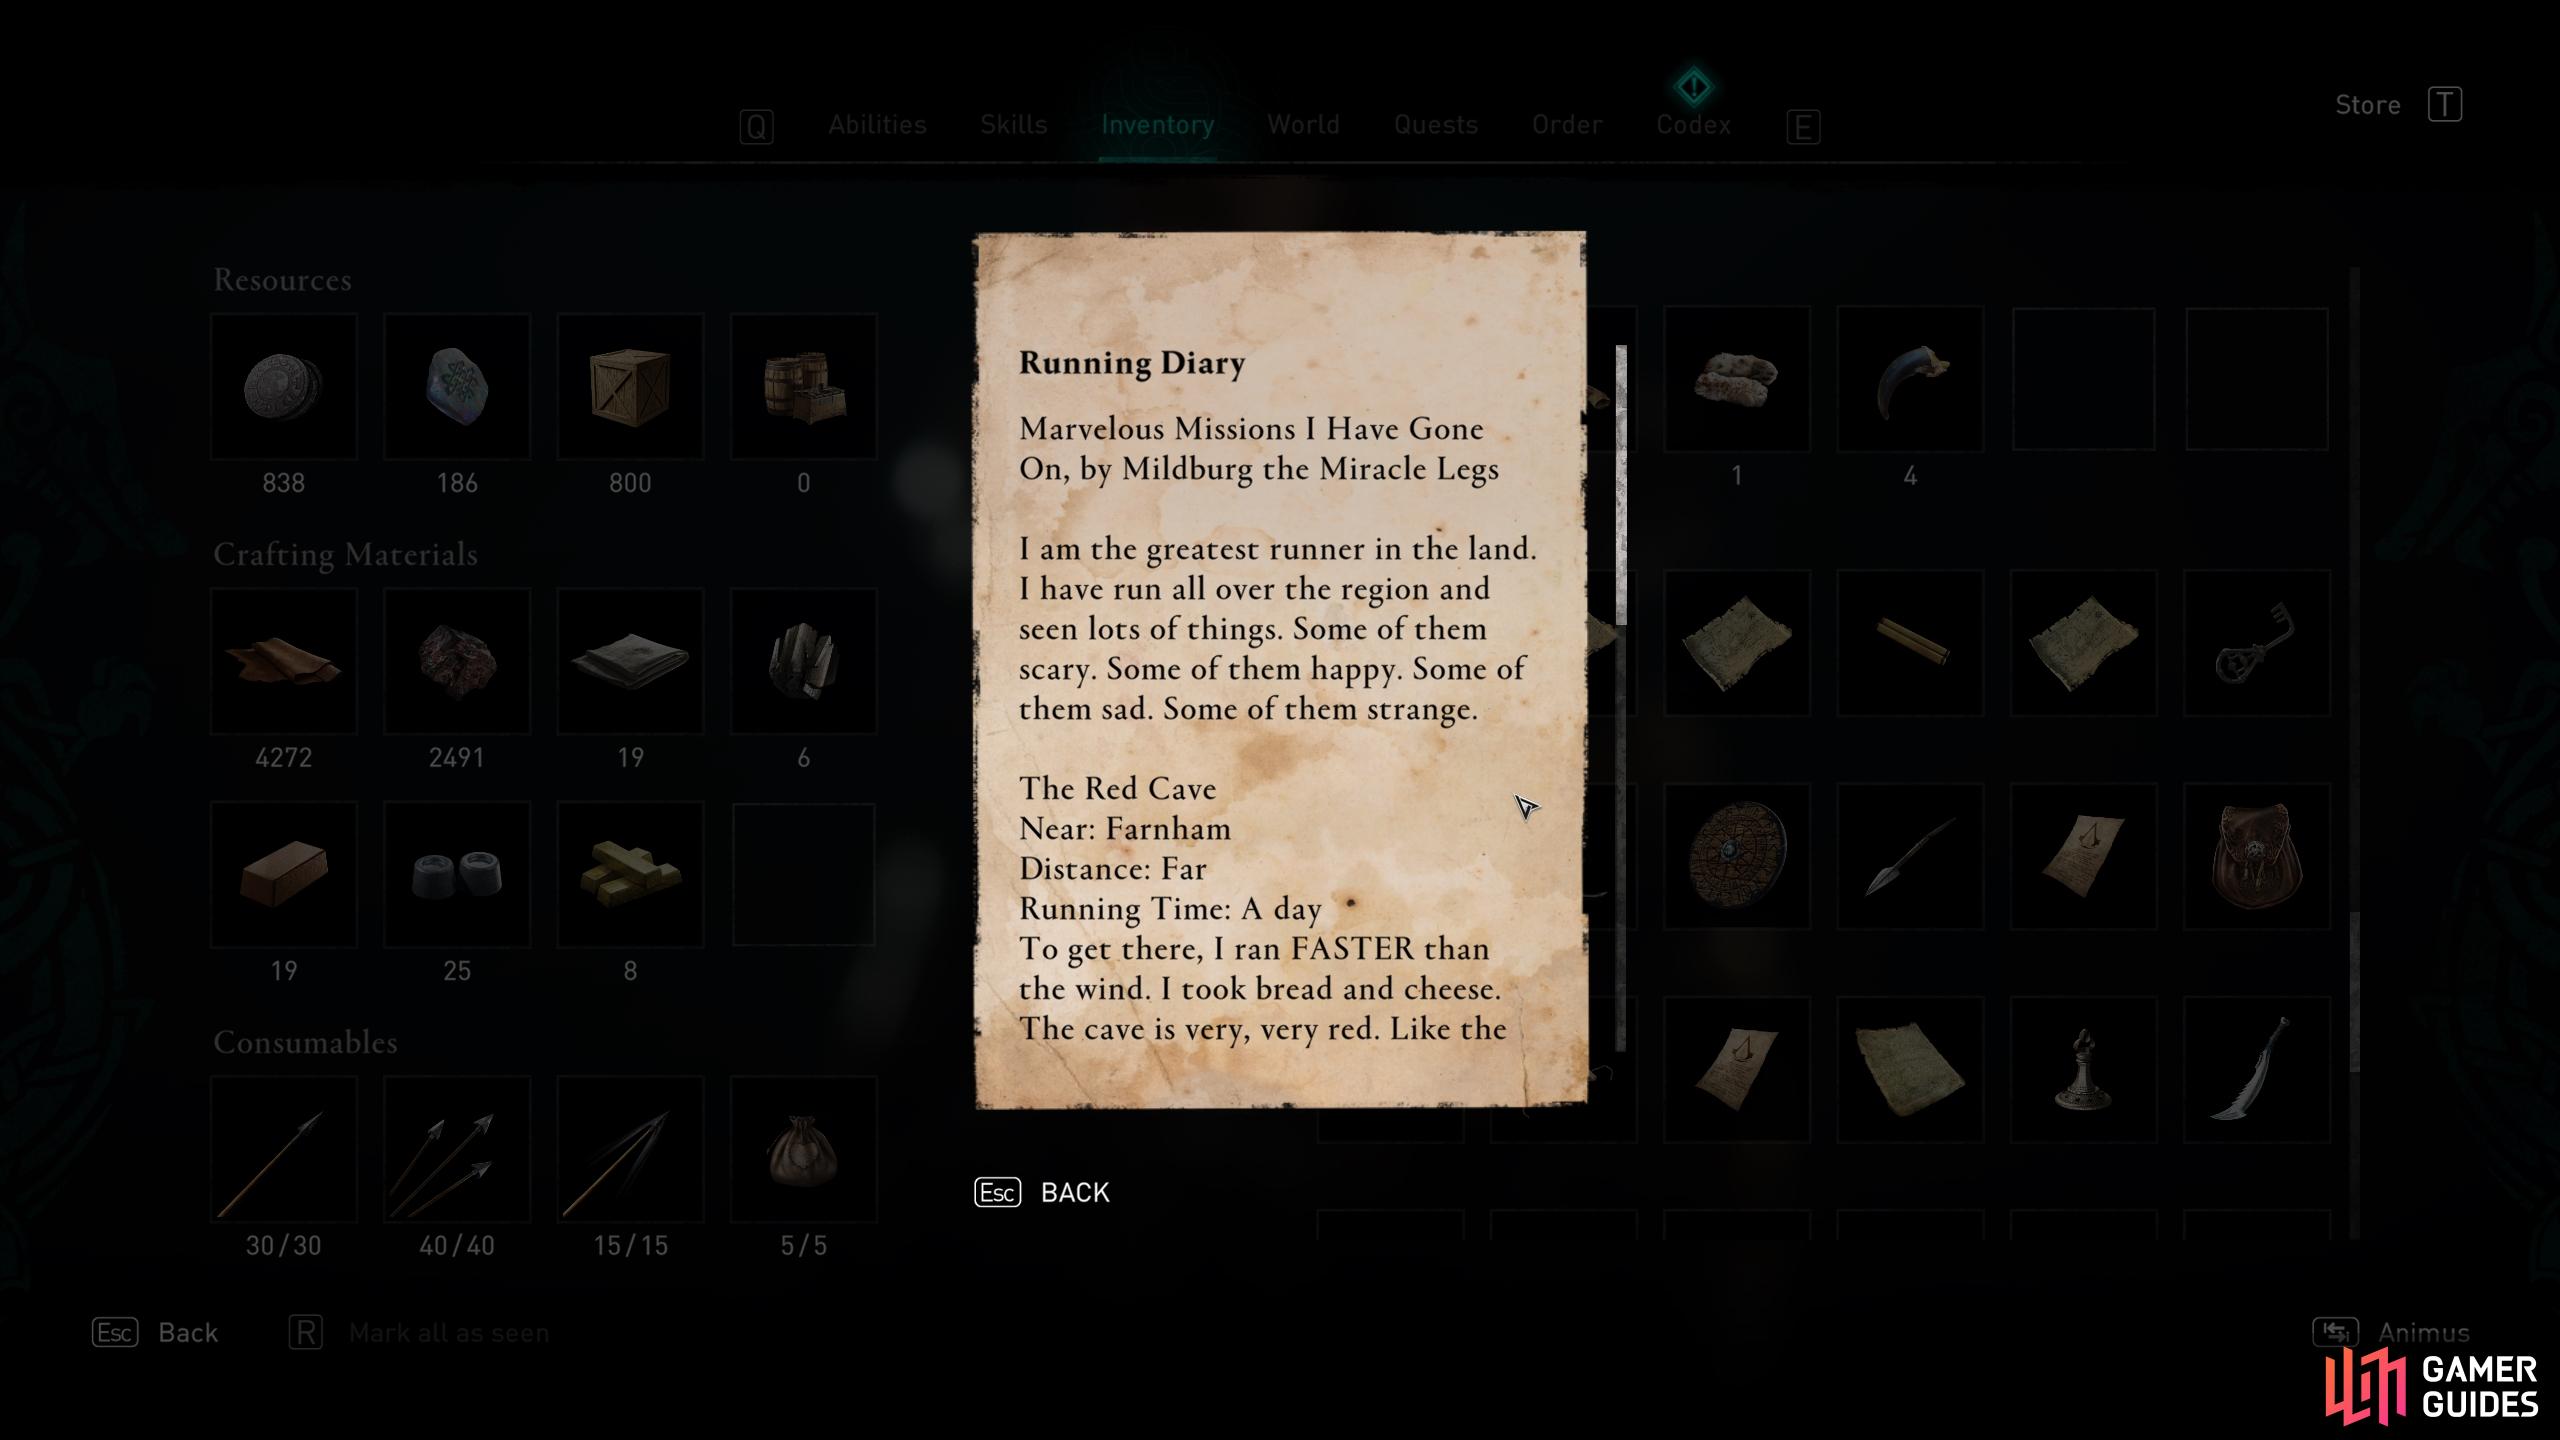 You'll find Mildburg's Running Diary in your inventory after completing the mystery.